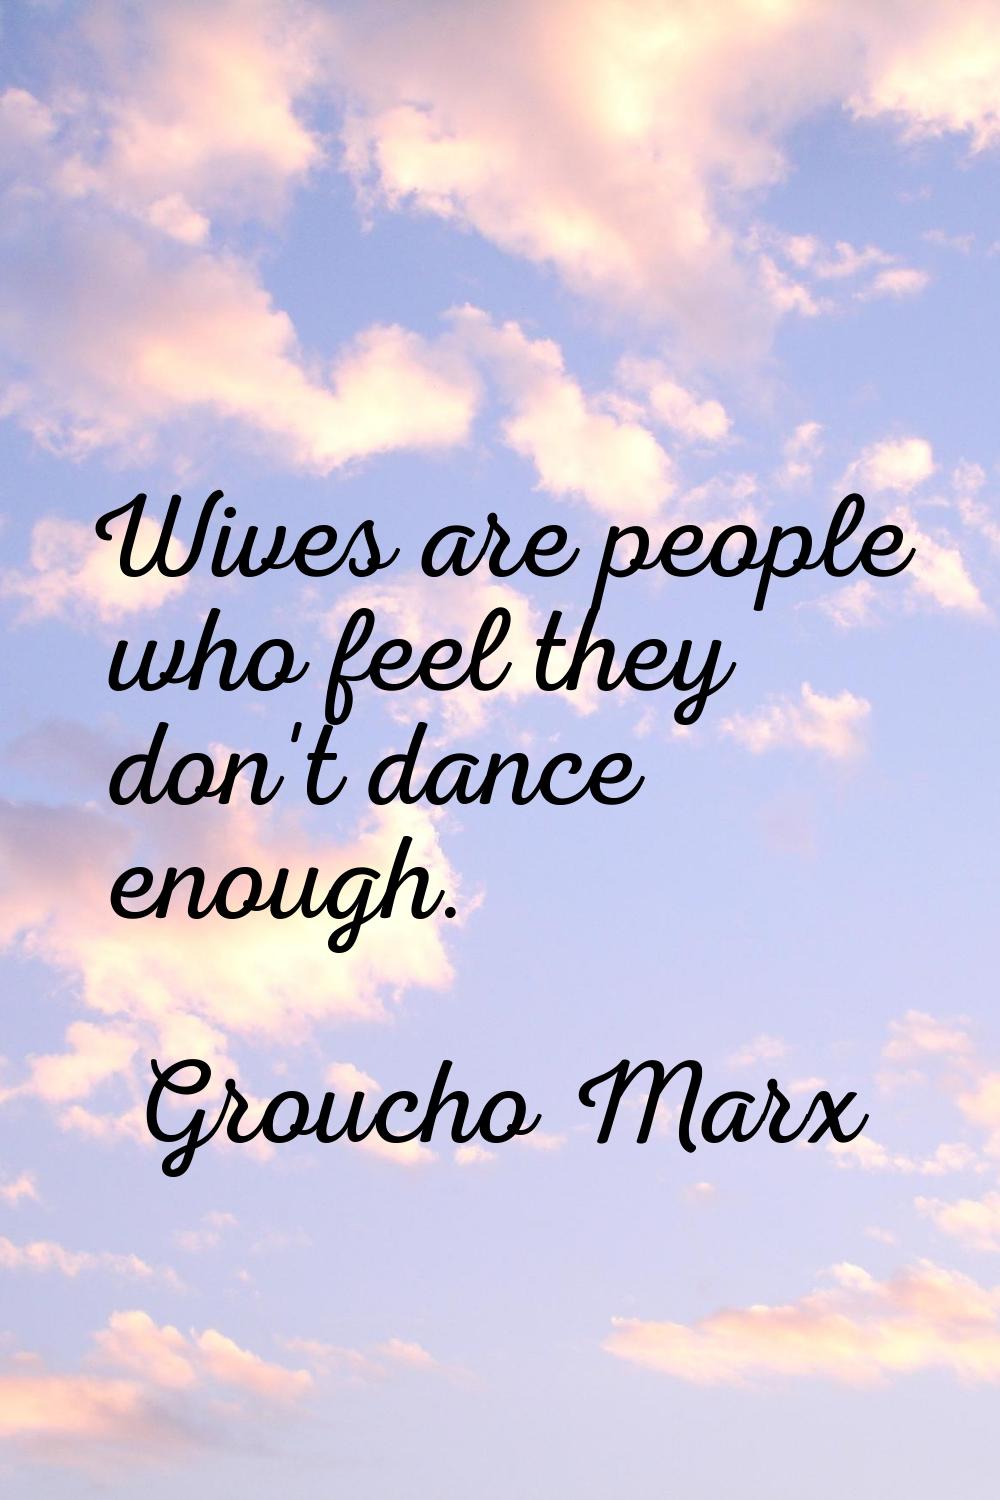 Wives are people who feel they don't dance enough.